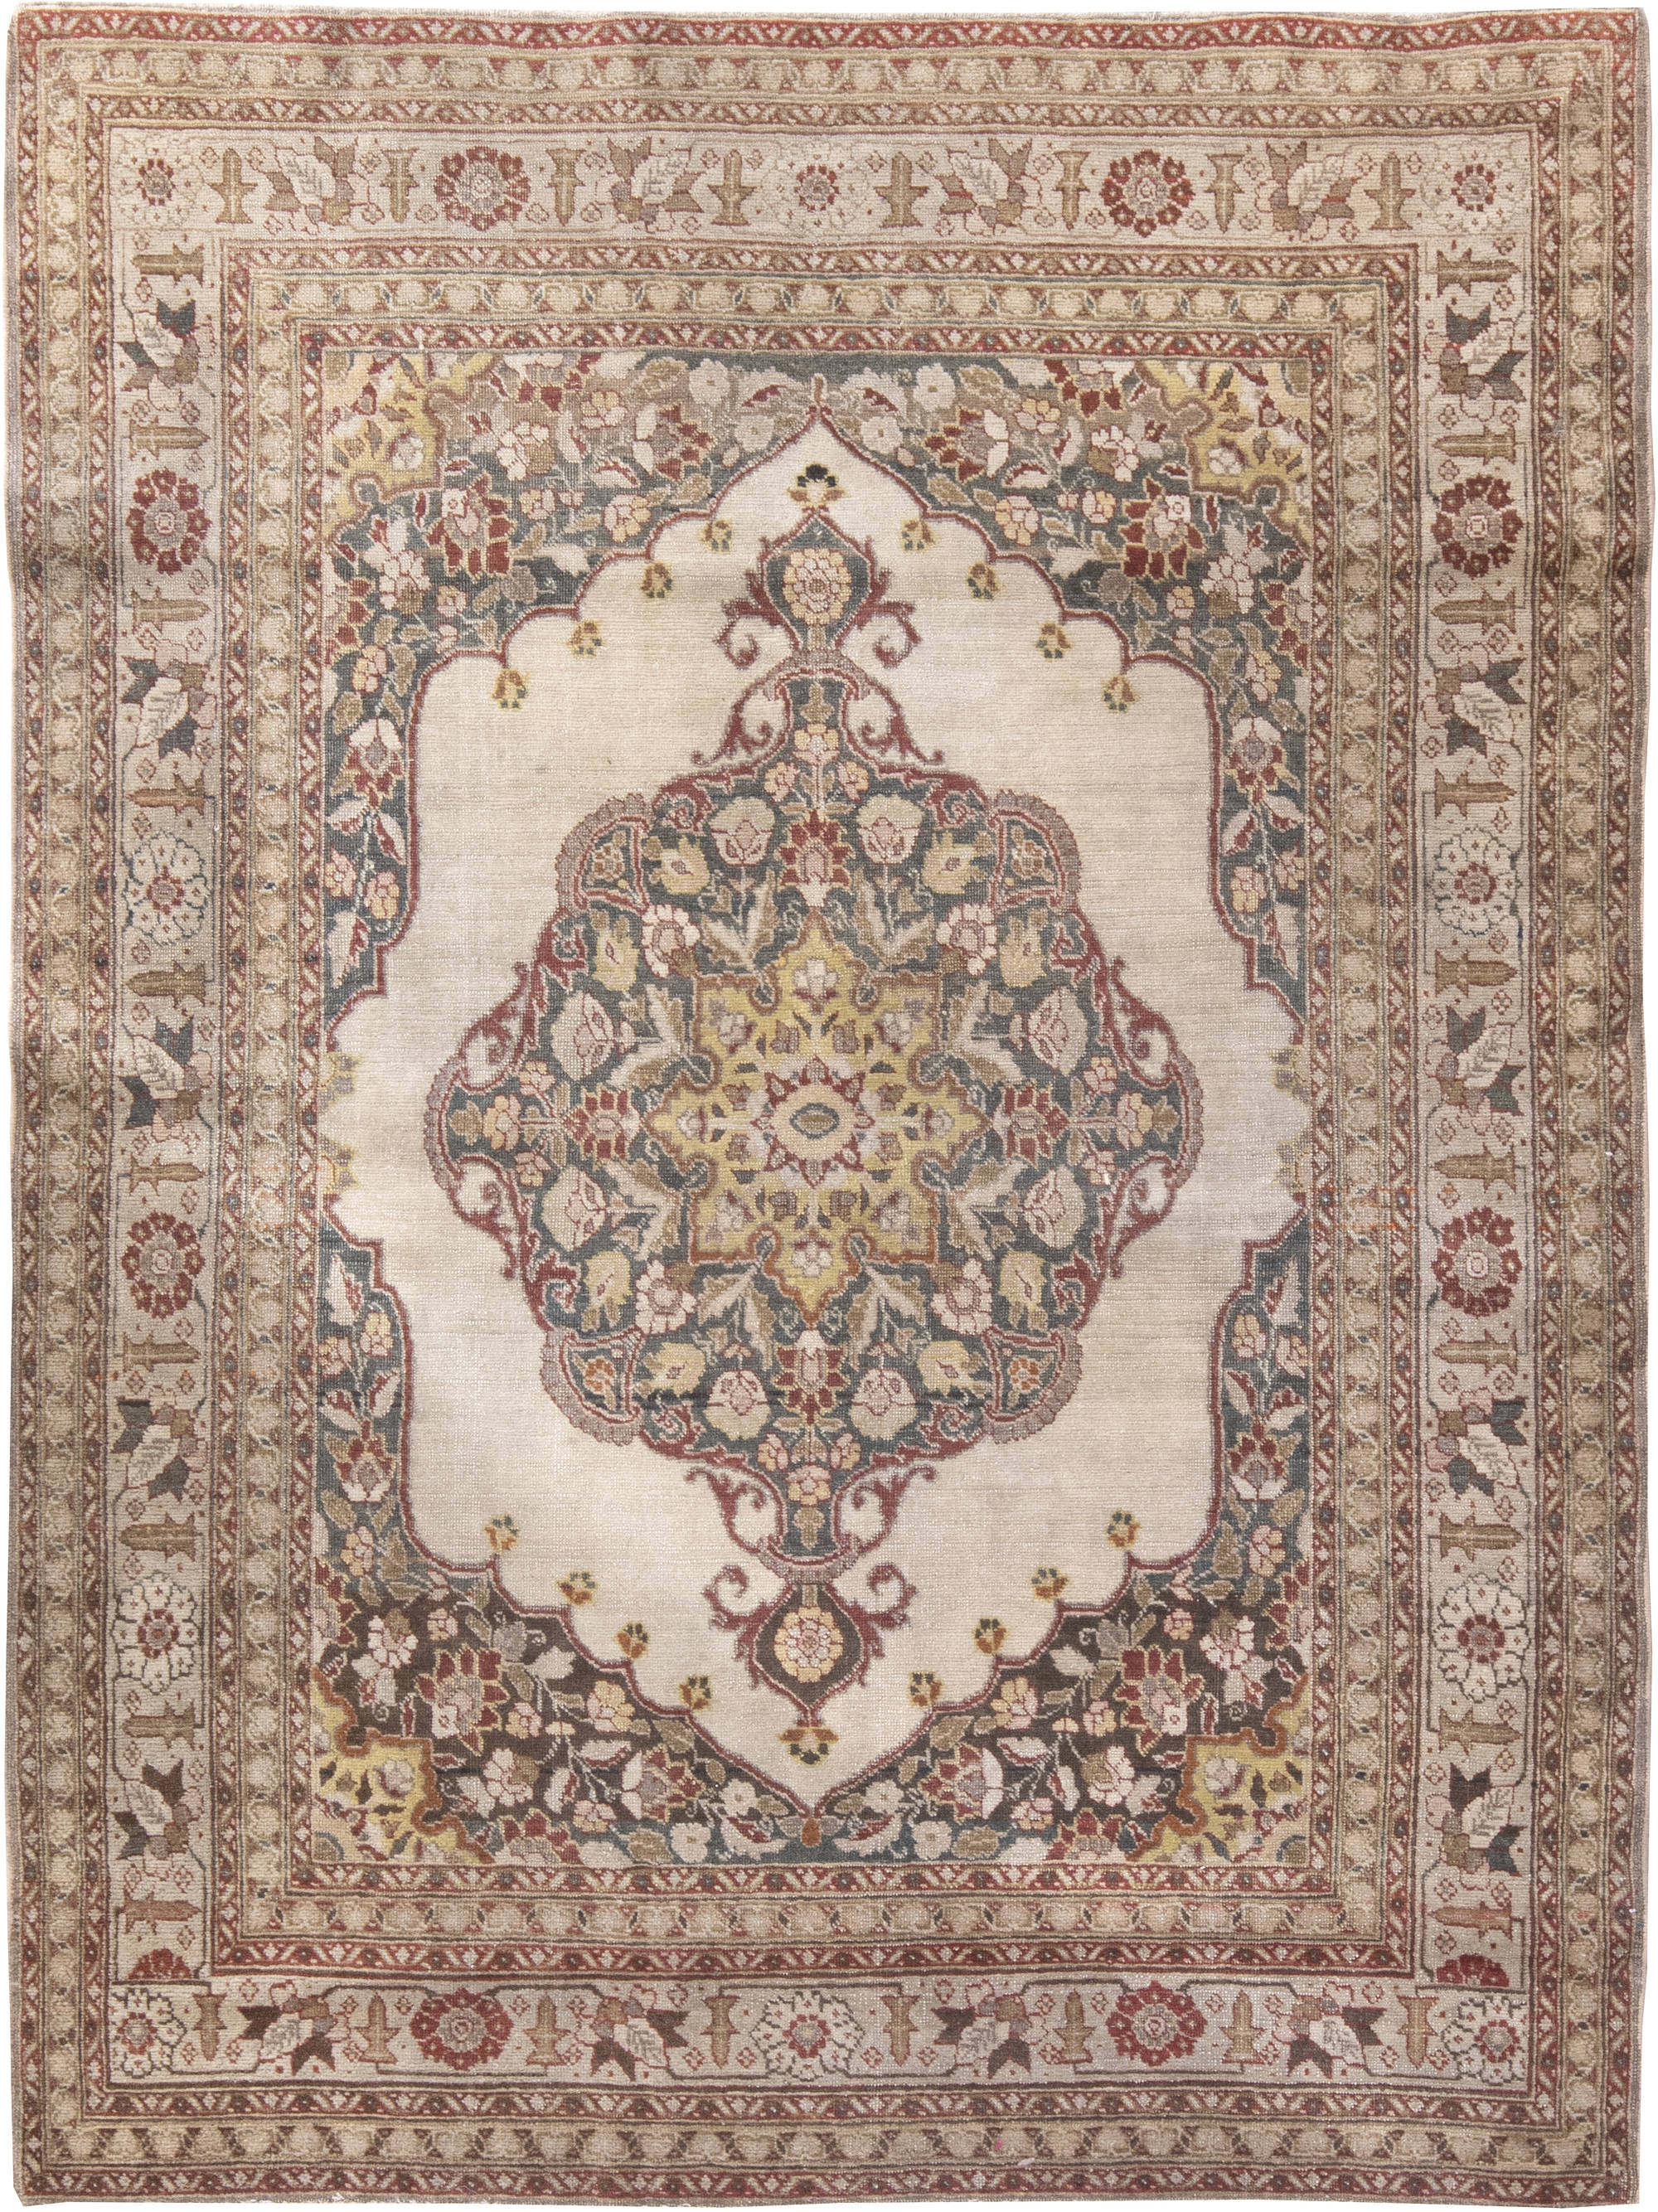 Antique Persian Rugs Antique Oriental Rugs Persian Carpets In NYC